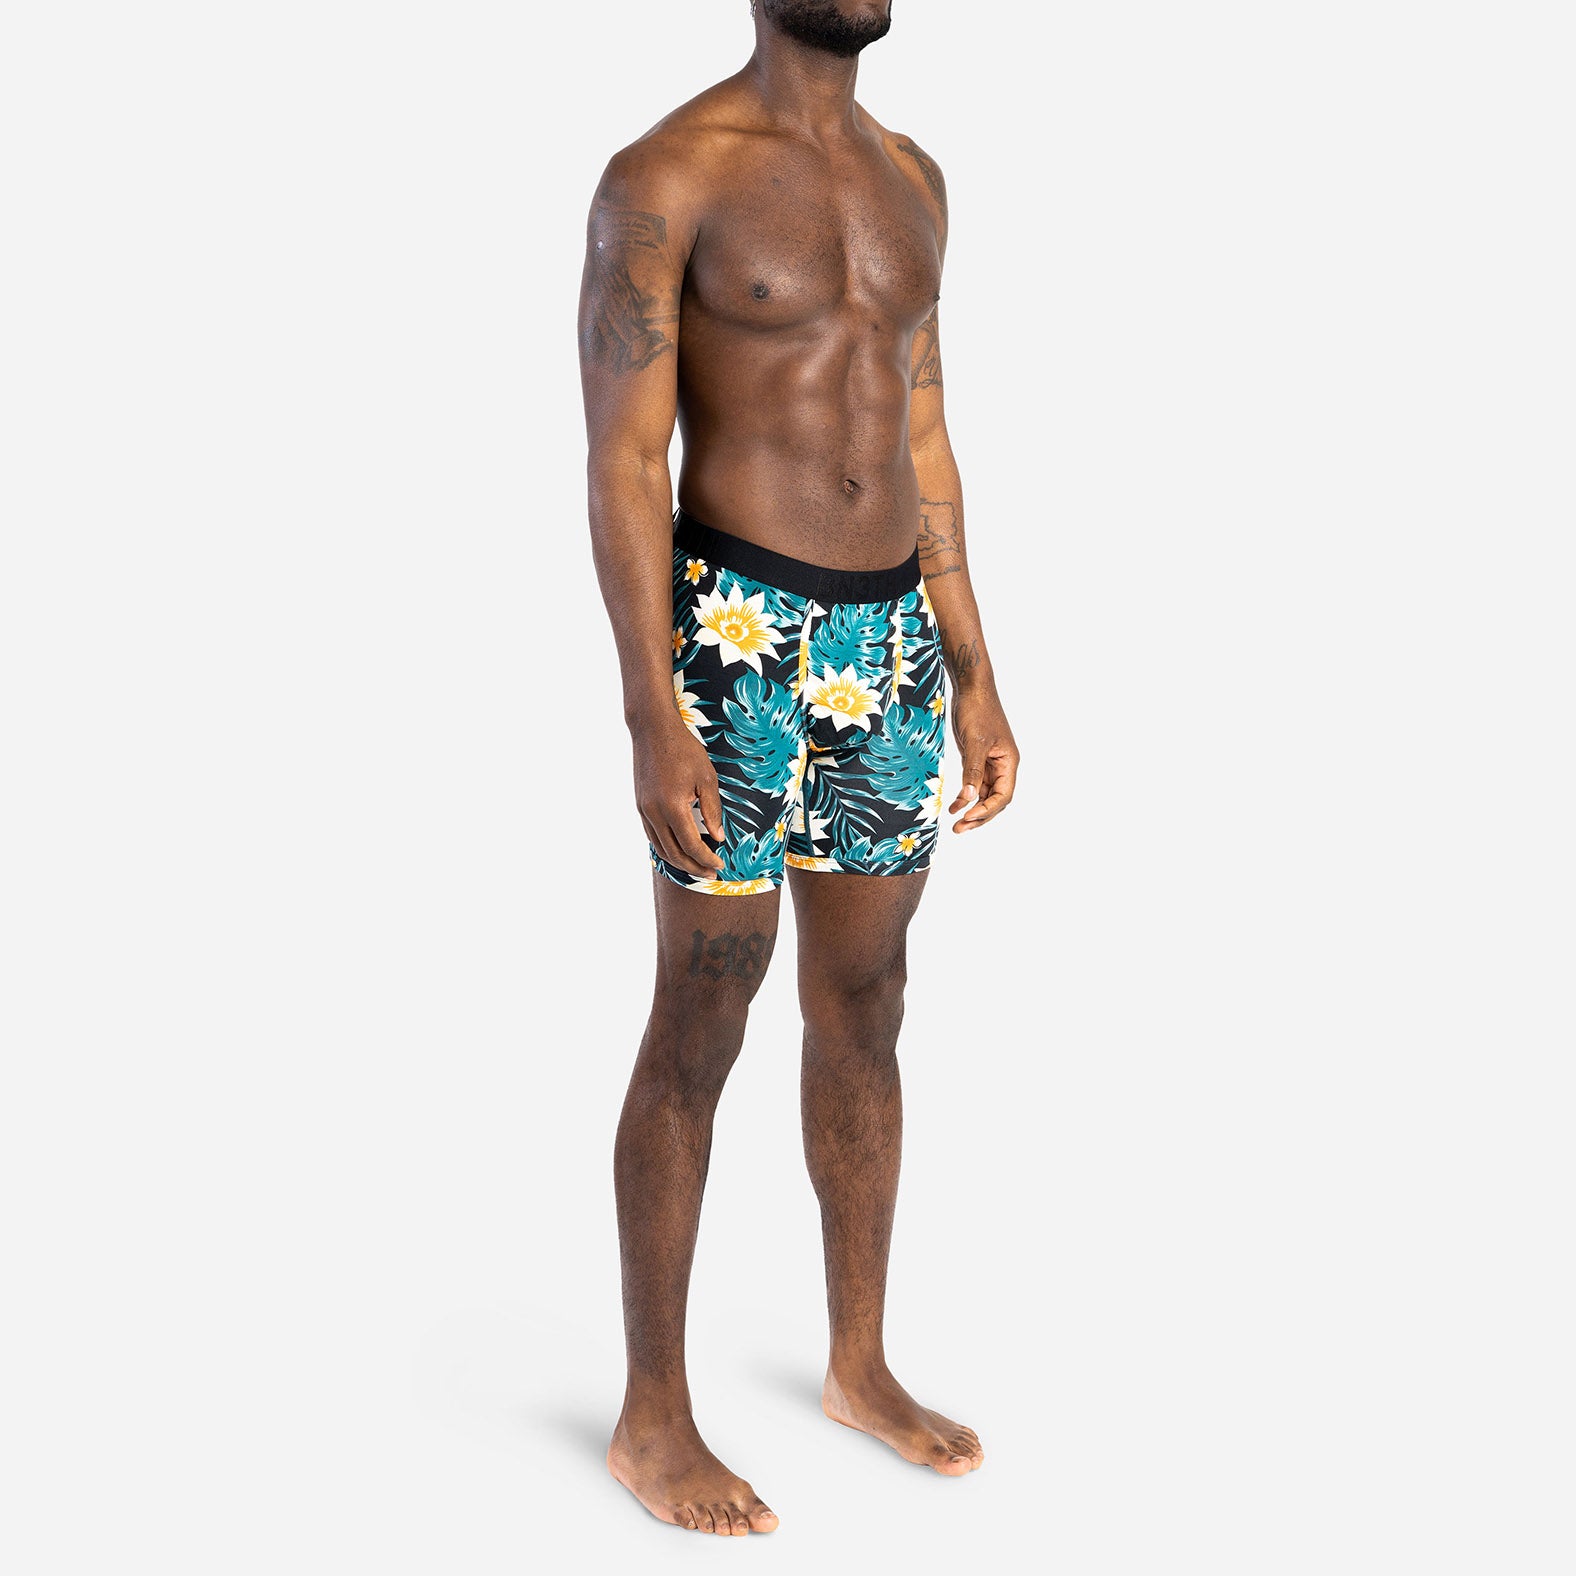 CLASSIC BOXER BRIEF WITH FLY: TROPICAL FLORAL BLACK